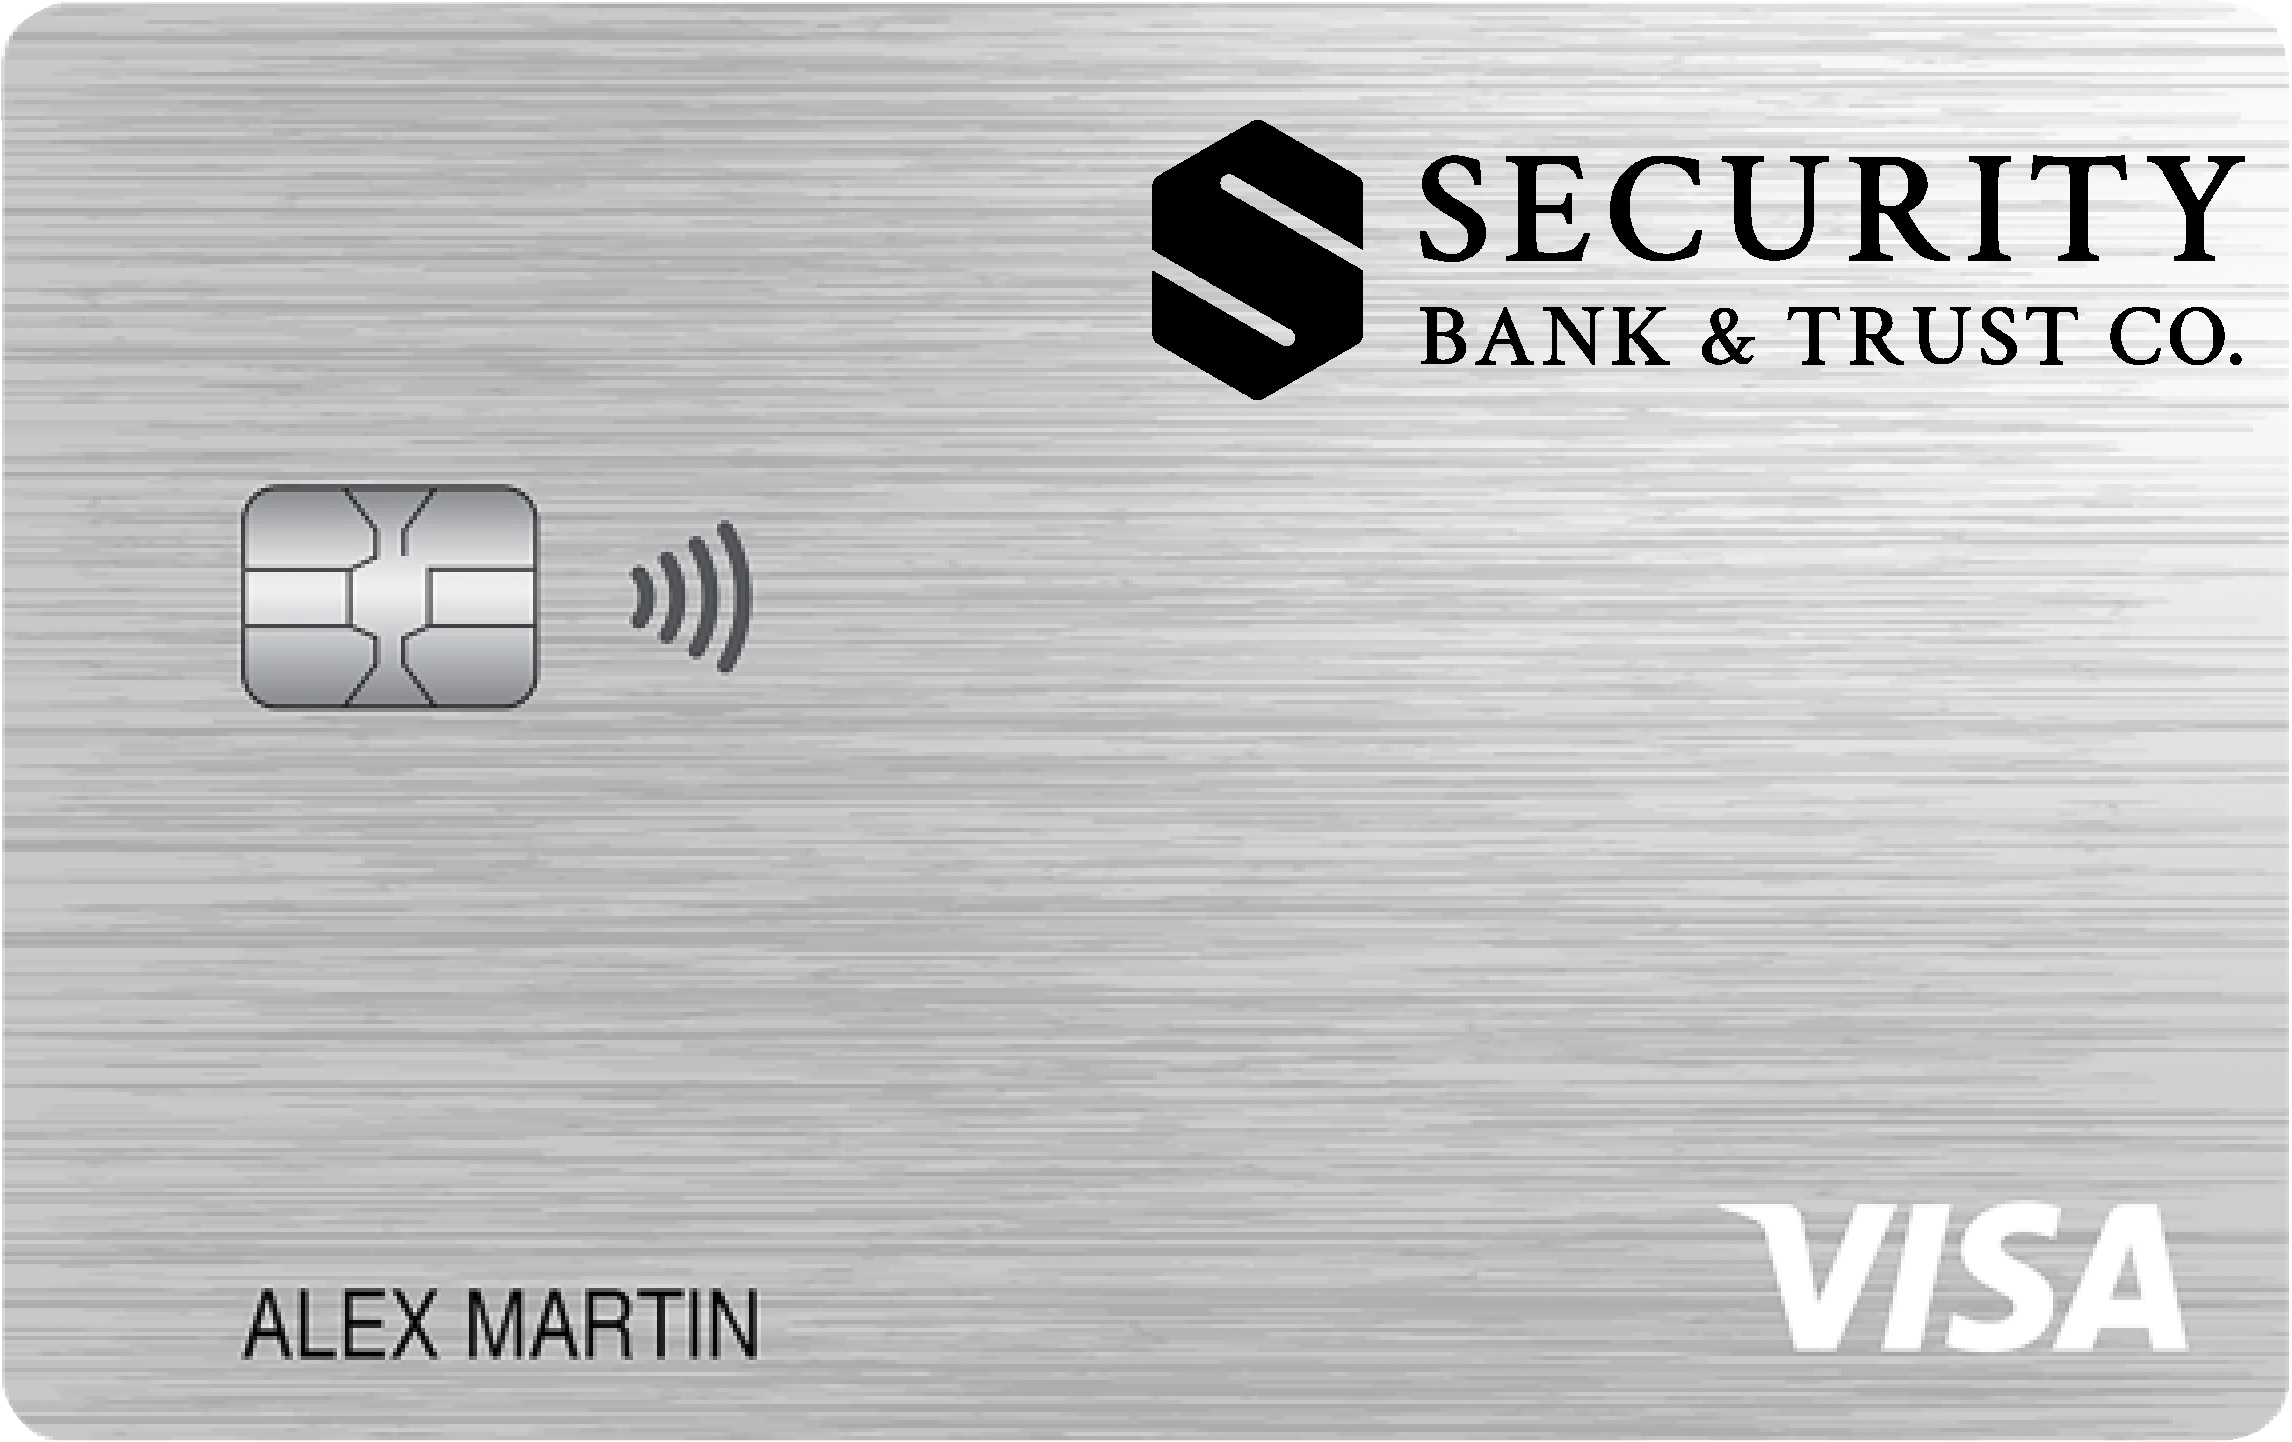 Security Bank & Trust Co. Secured Card